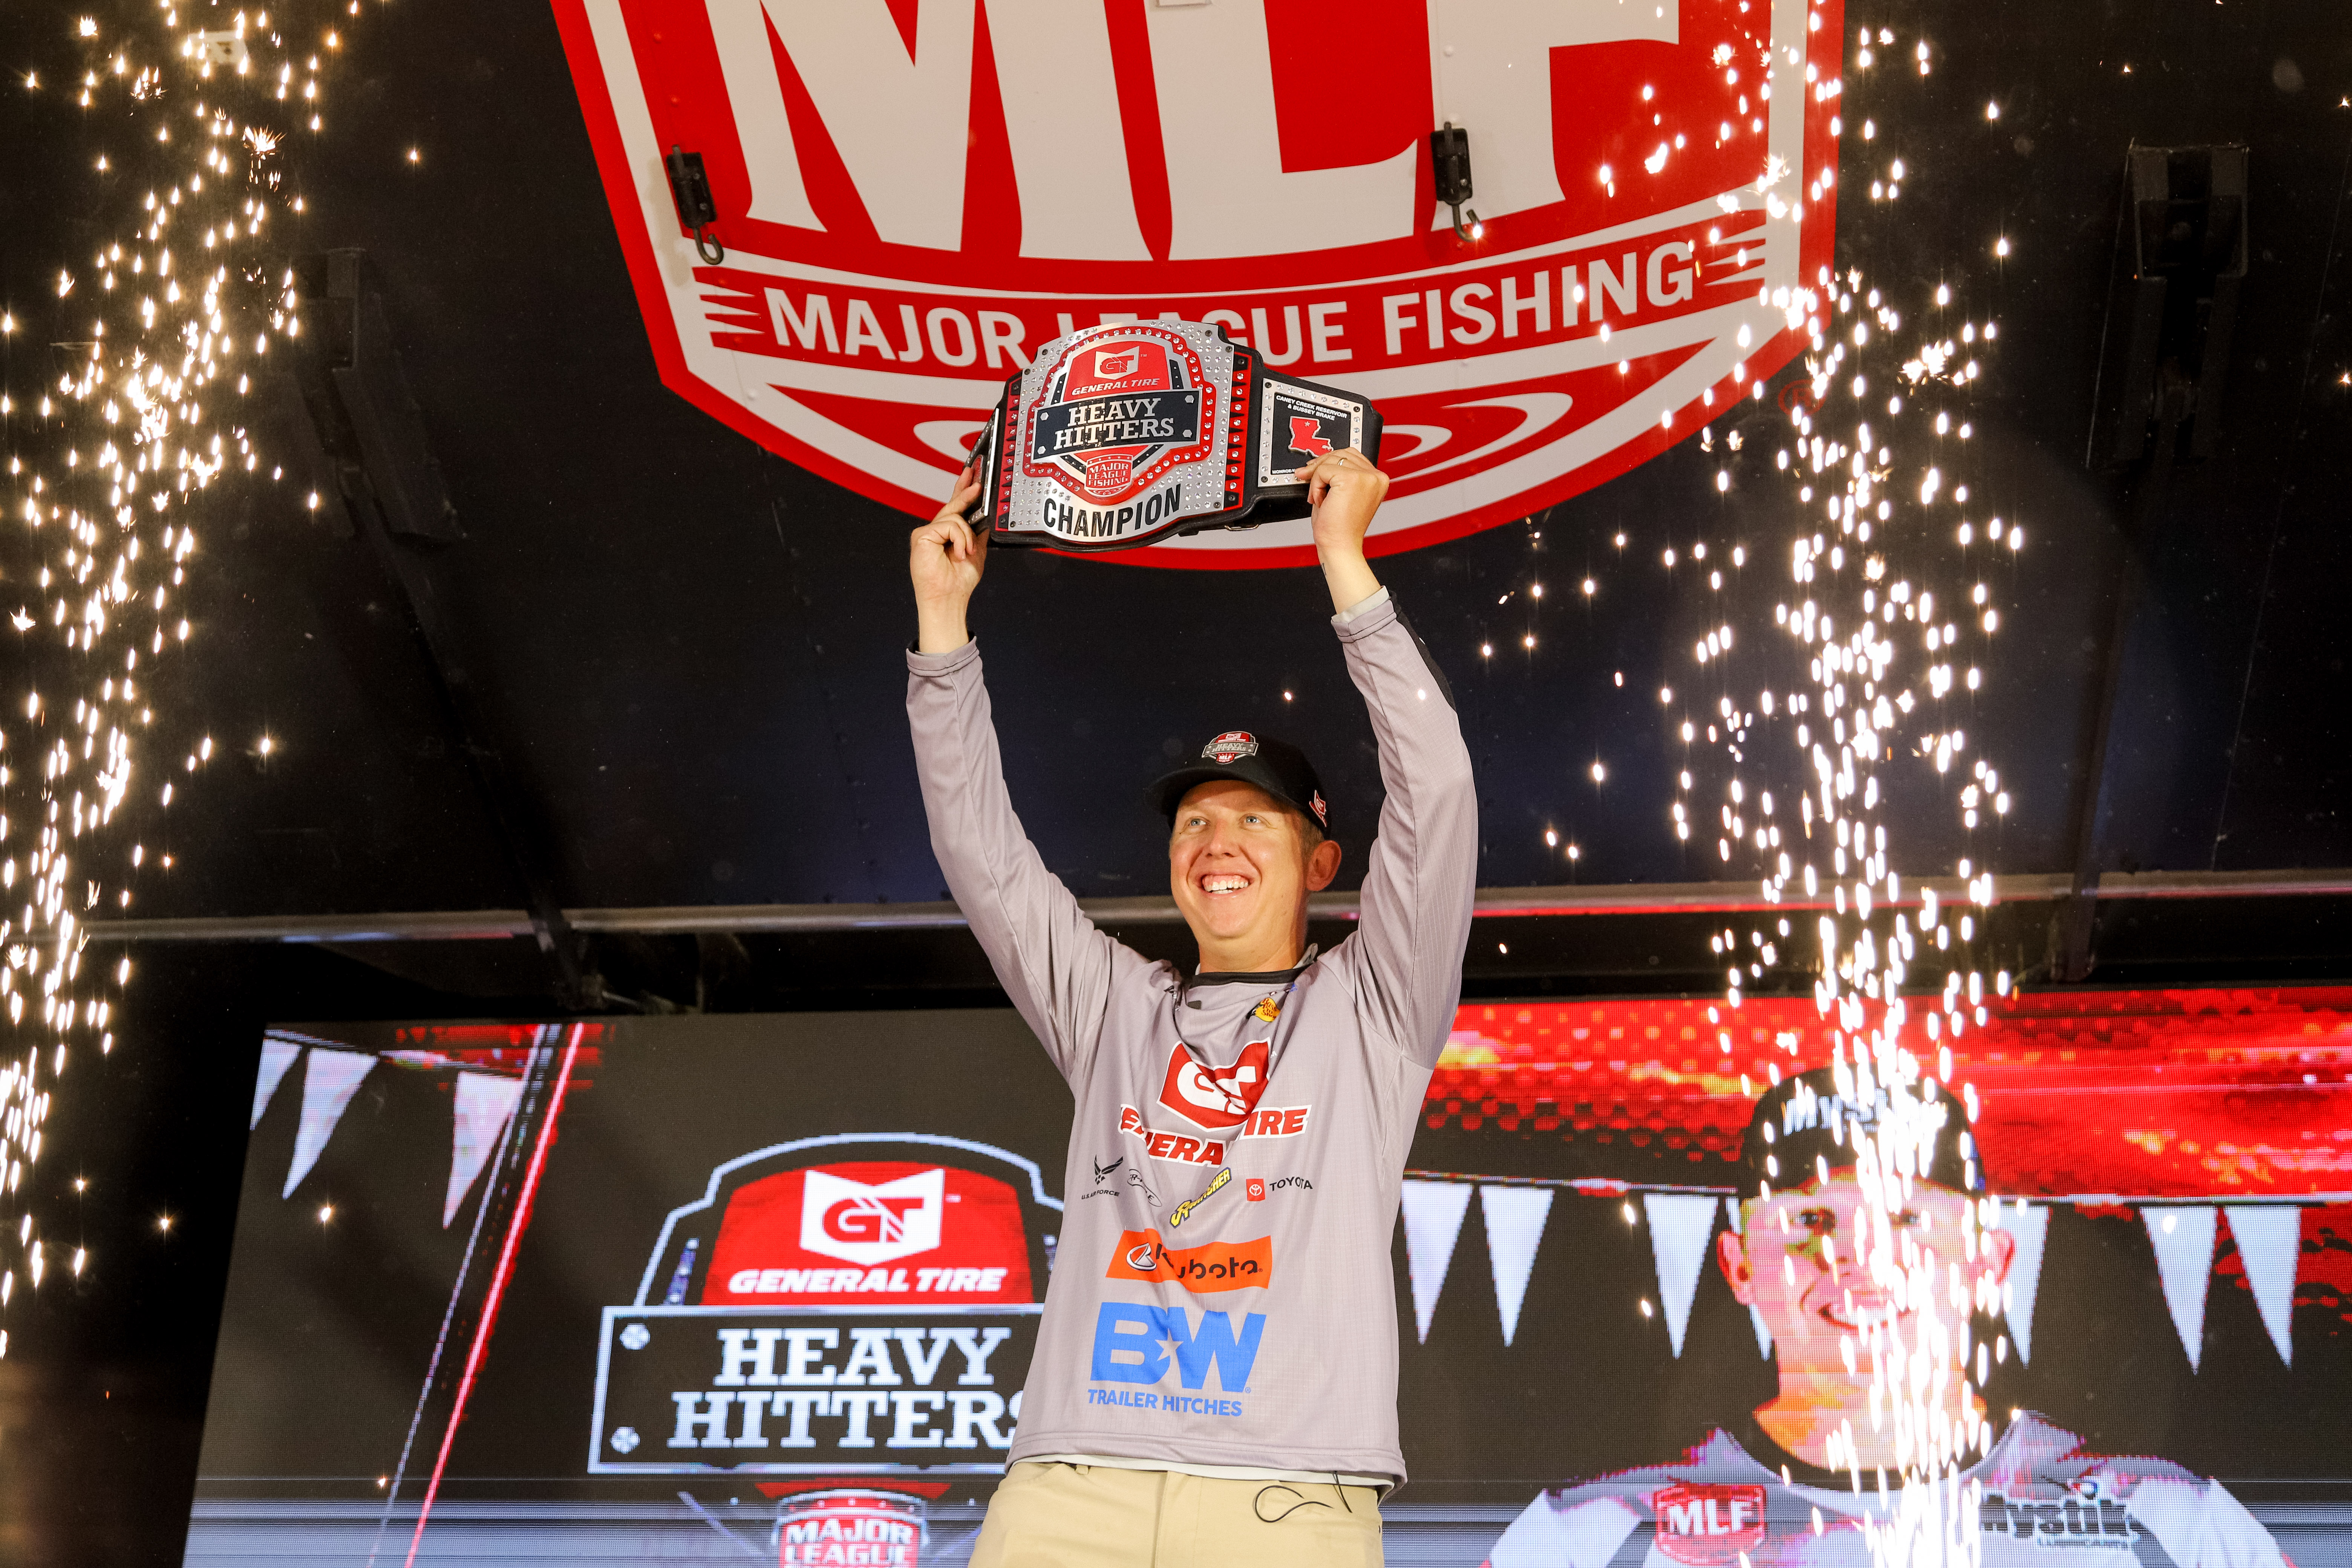 Jones Jr. wins General Tire Heavy Hitters Presented by Bass Pro Shops to  earn $100K, Thrift catches $100K Big Bass - Major League Fishing